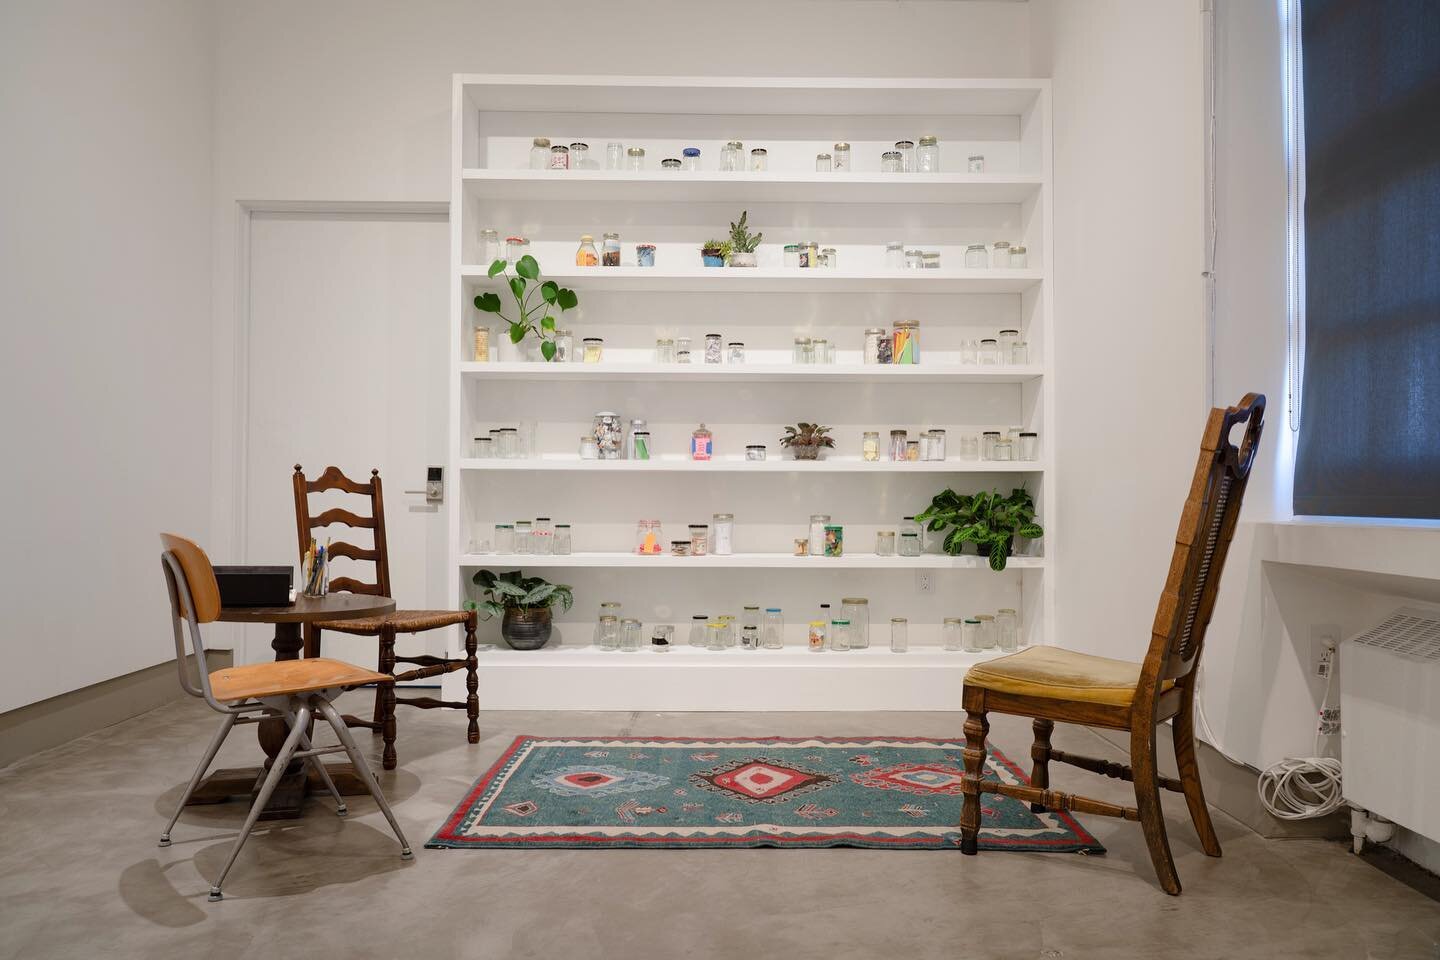 Carmina Eliason&rsquo;s &ldquo;This is a jar for your f***s,&rdquo; 2019-present, anonymous contributions from community members and visitors.
@carminaeliason @this.is.a.jar ***
Embark&rsquo;s final exhibition &ldquo;Later Days&rdquo; is open Thursda